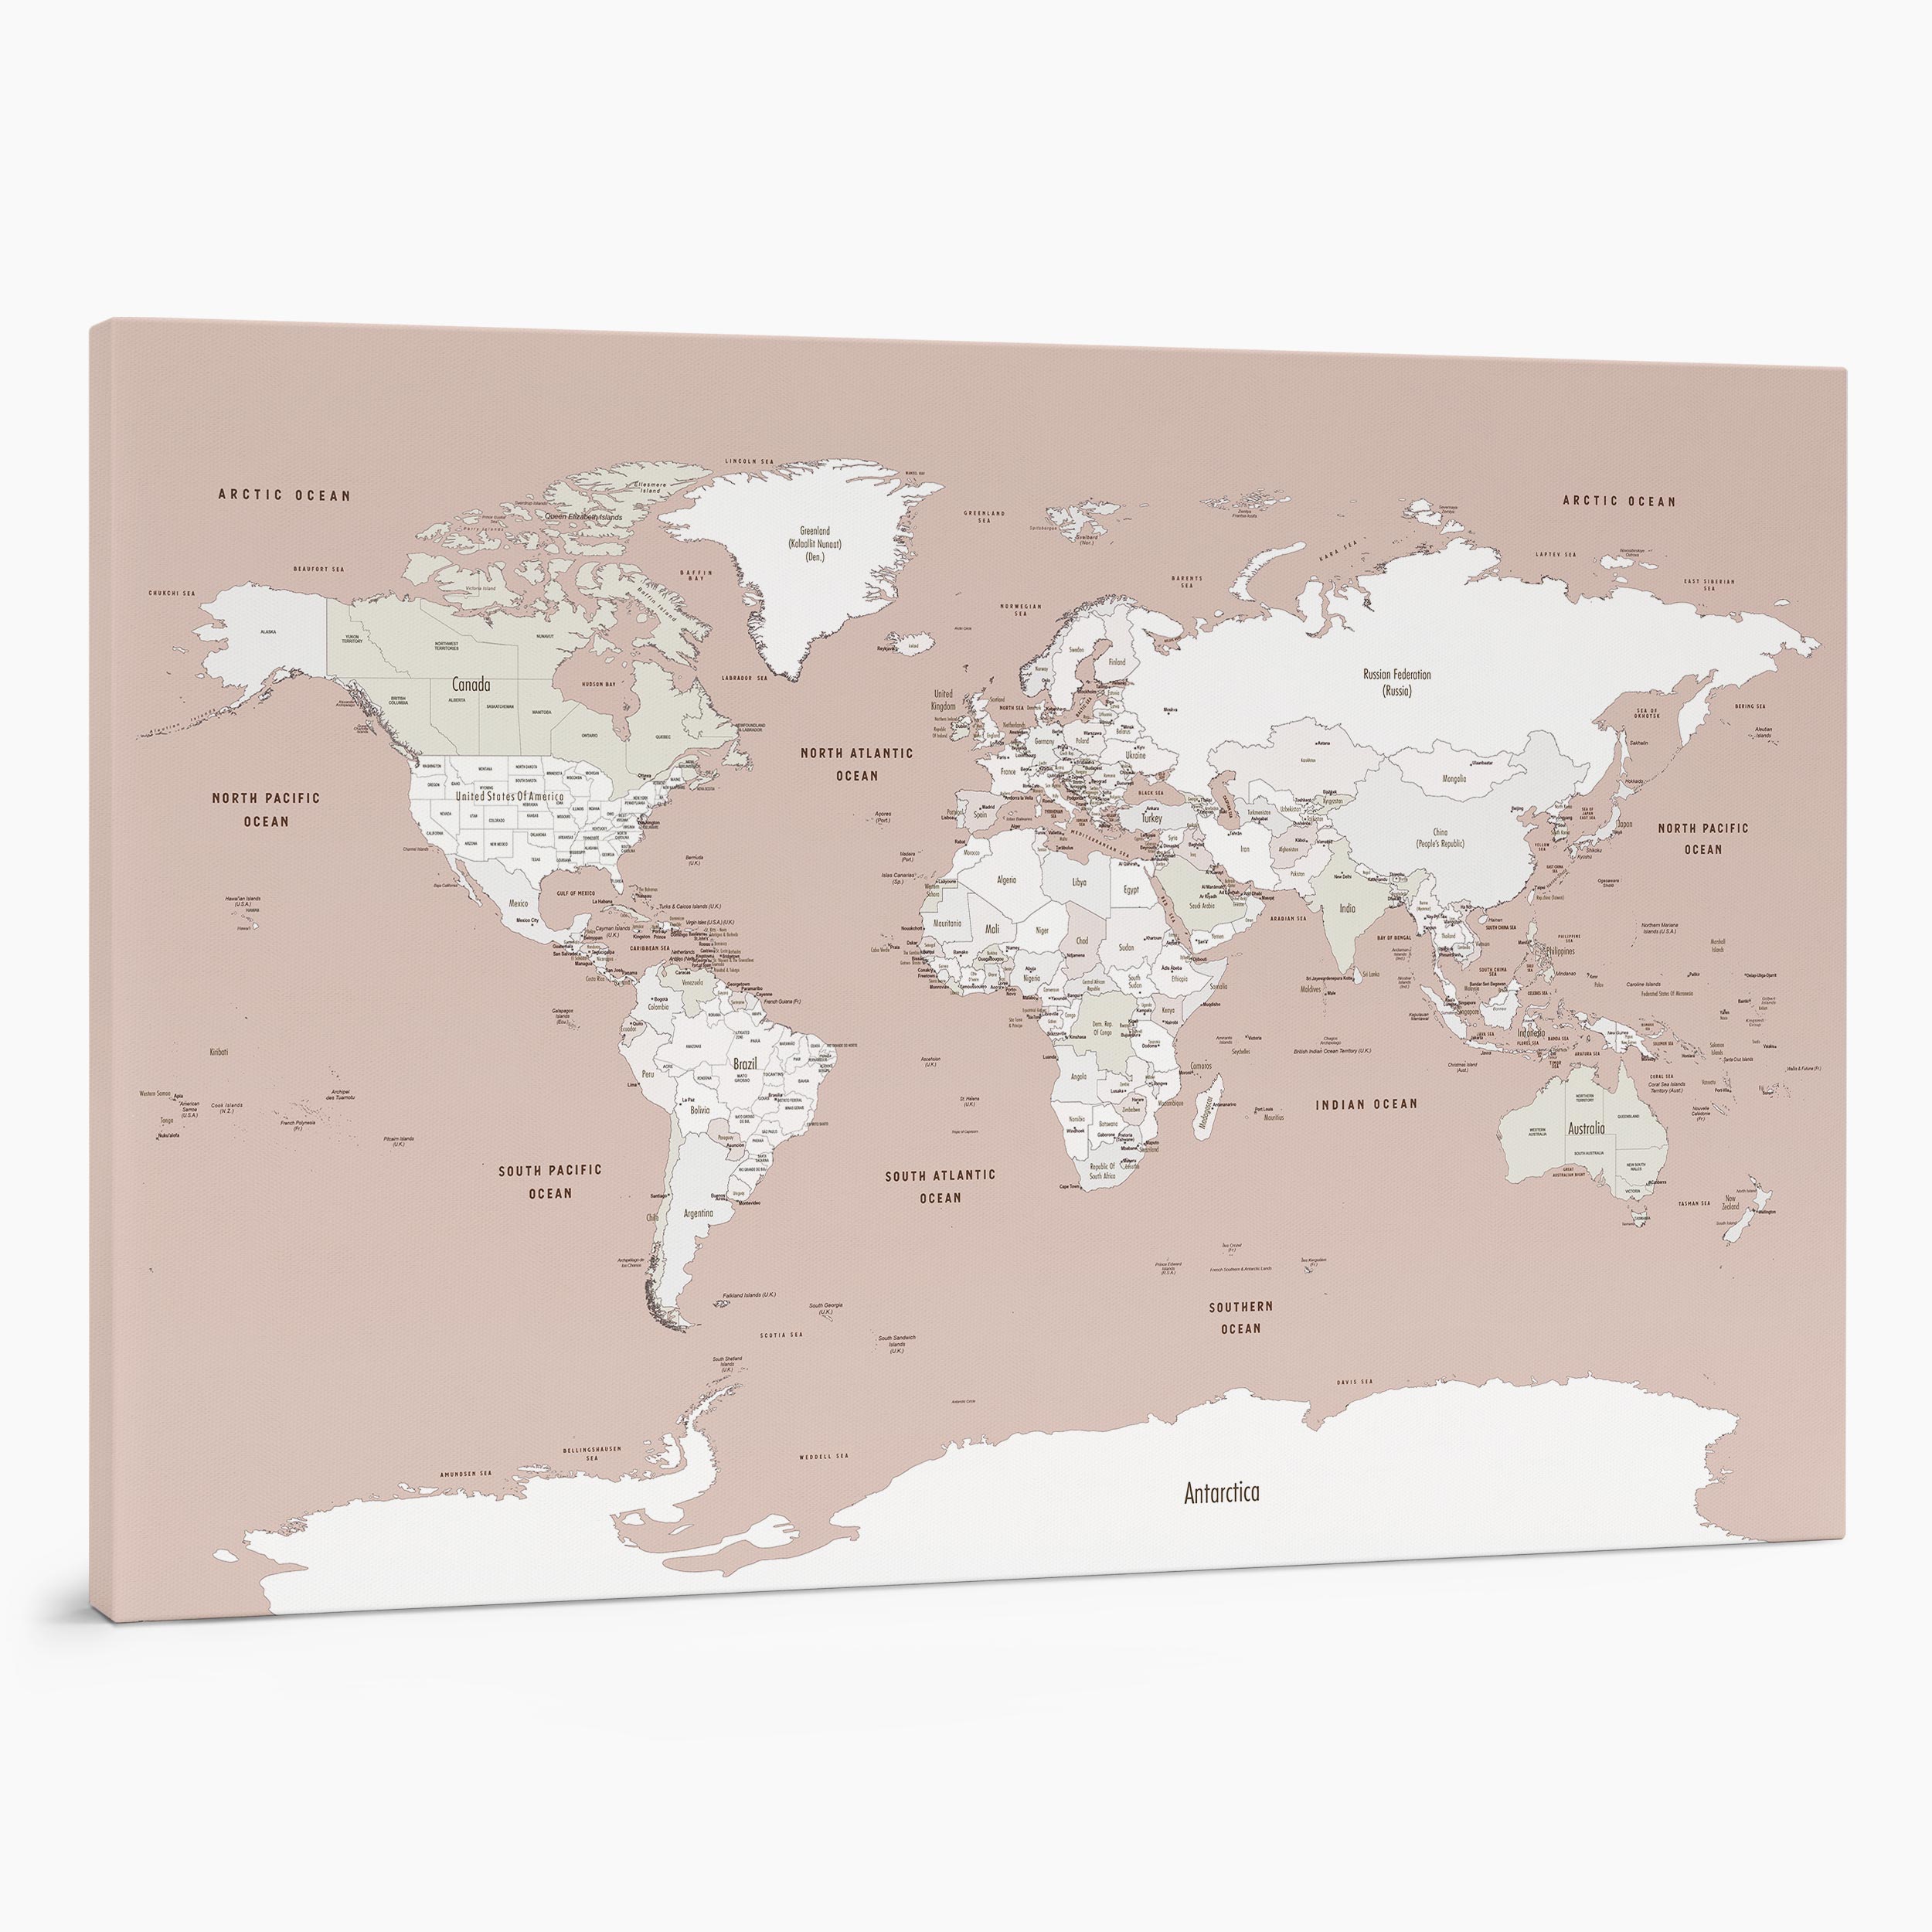 3MP small push pin world map to pin places you have visited pink rose